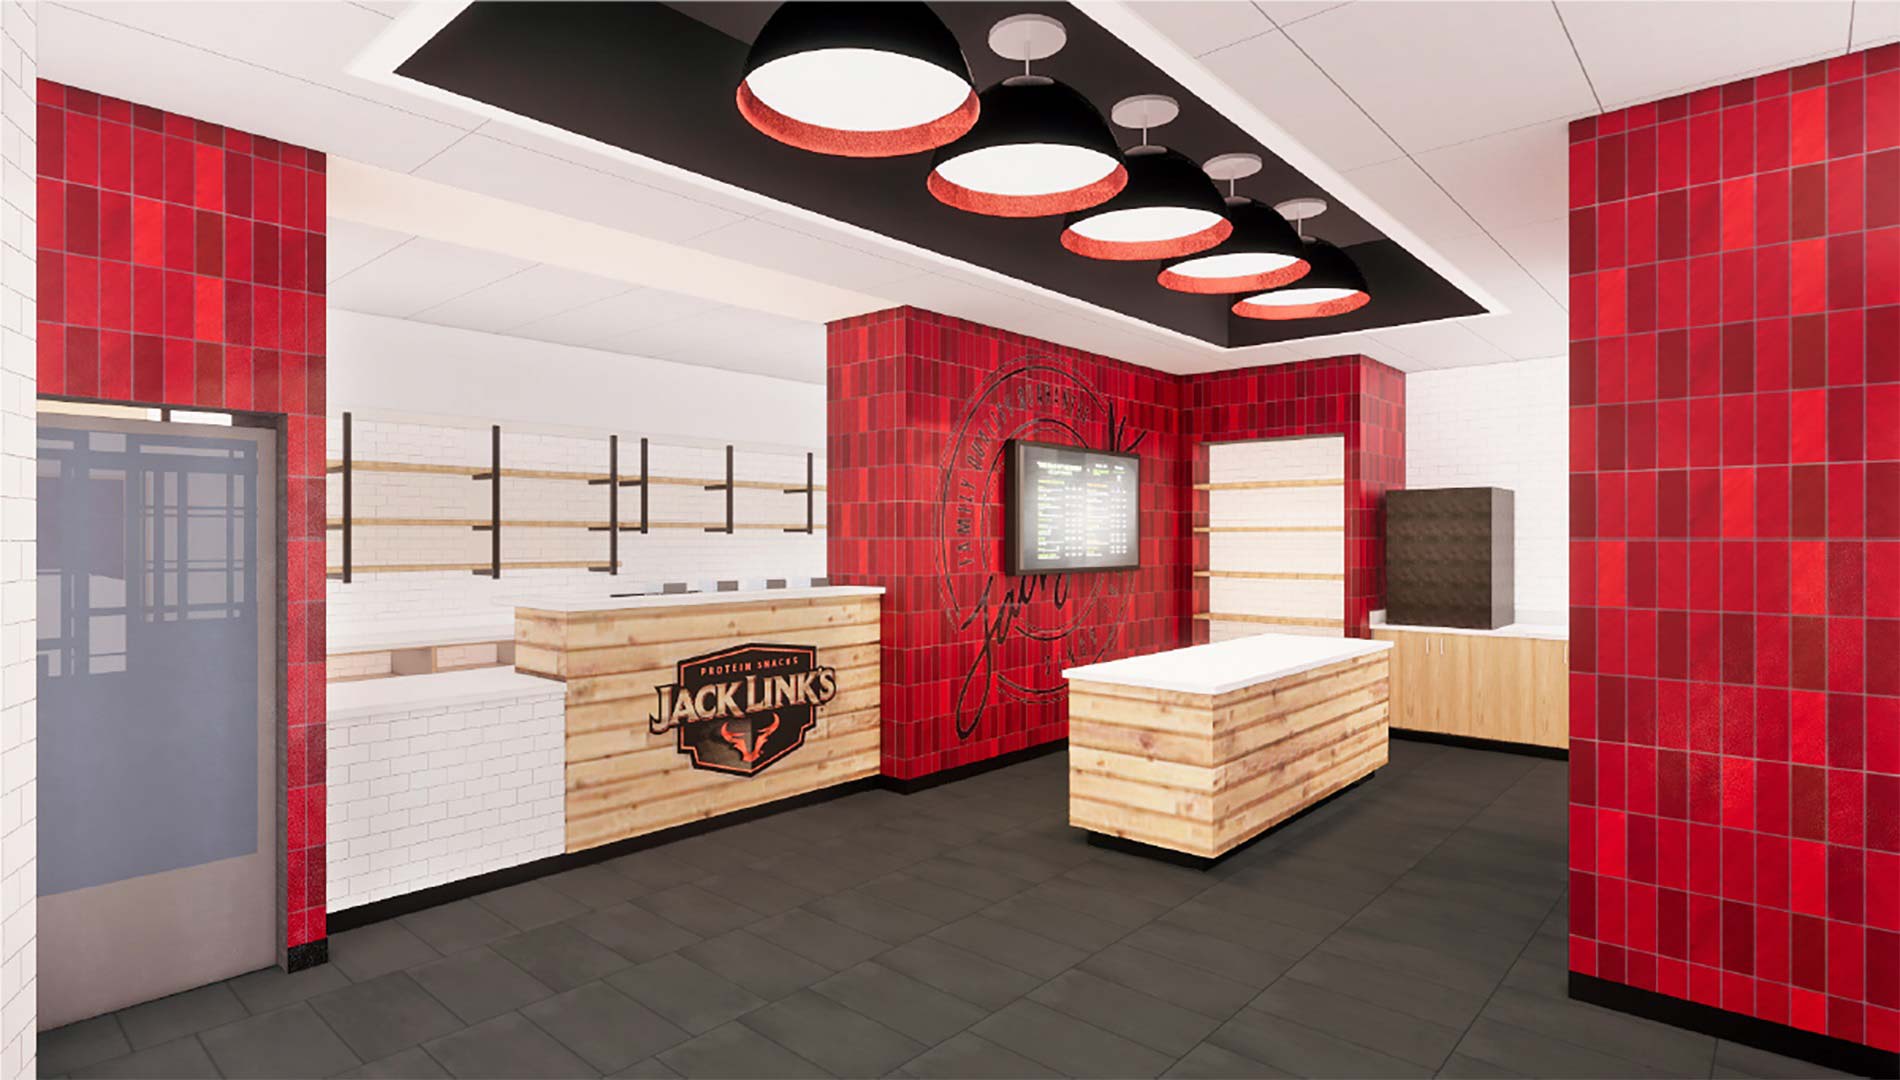 A rendering view of the Jack Links Protein area where student-athletes can get food and other protein items. The area has large overhead lighting, mostly red tiled covered walls, and wood accents.